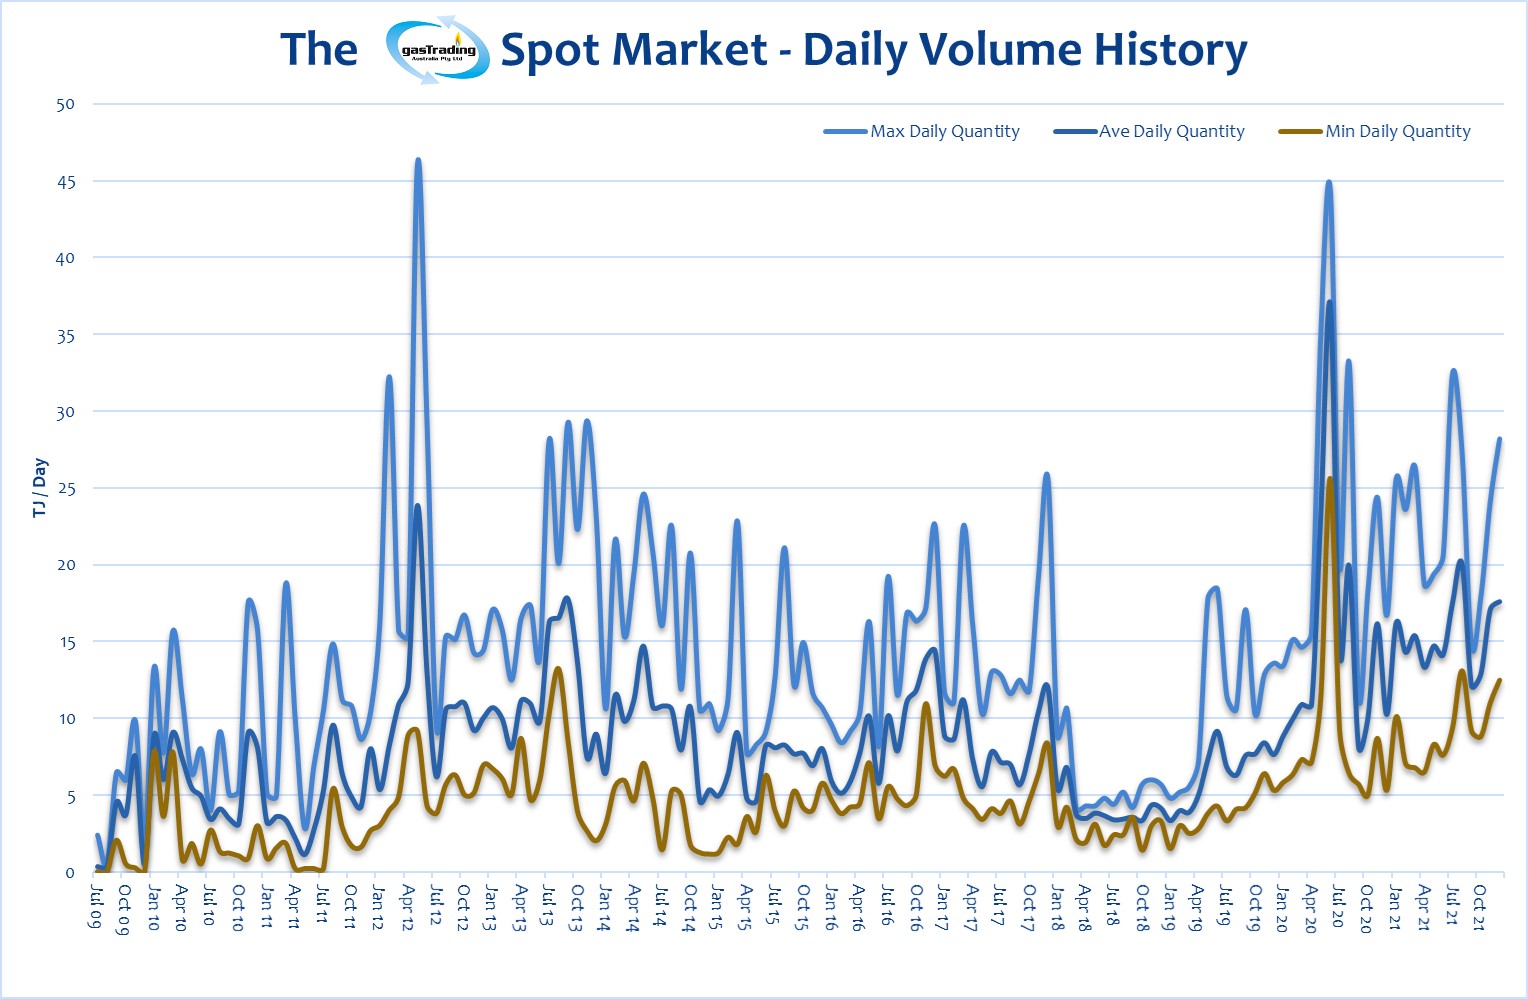 Daily Volume History